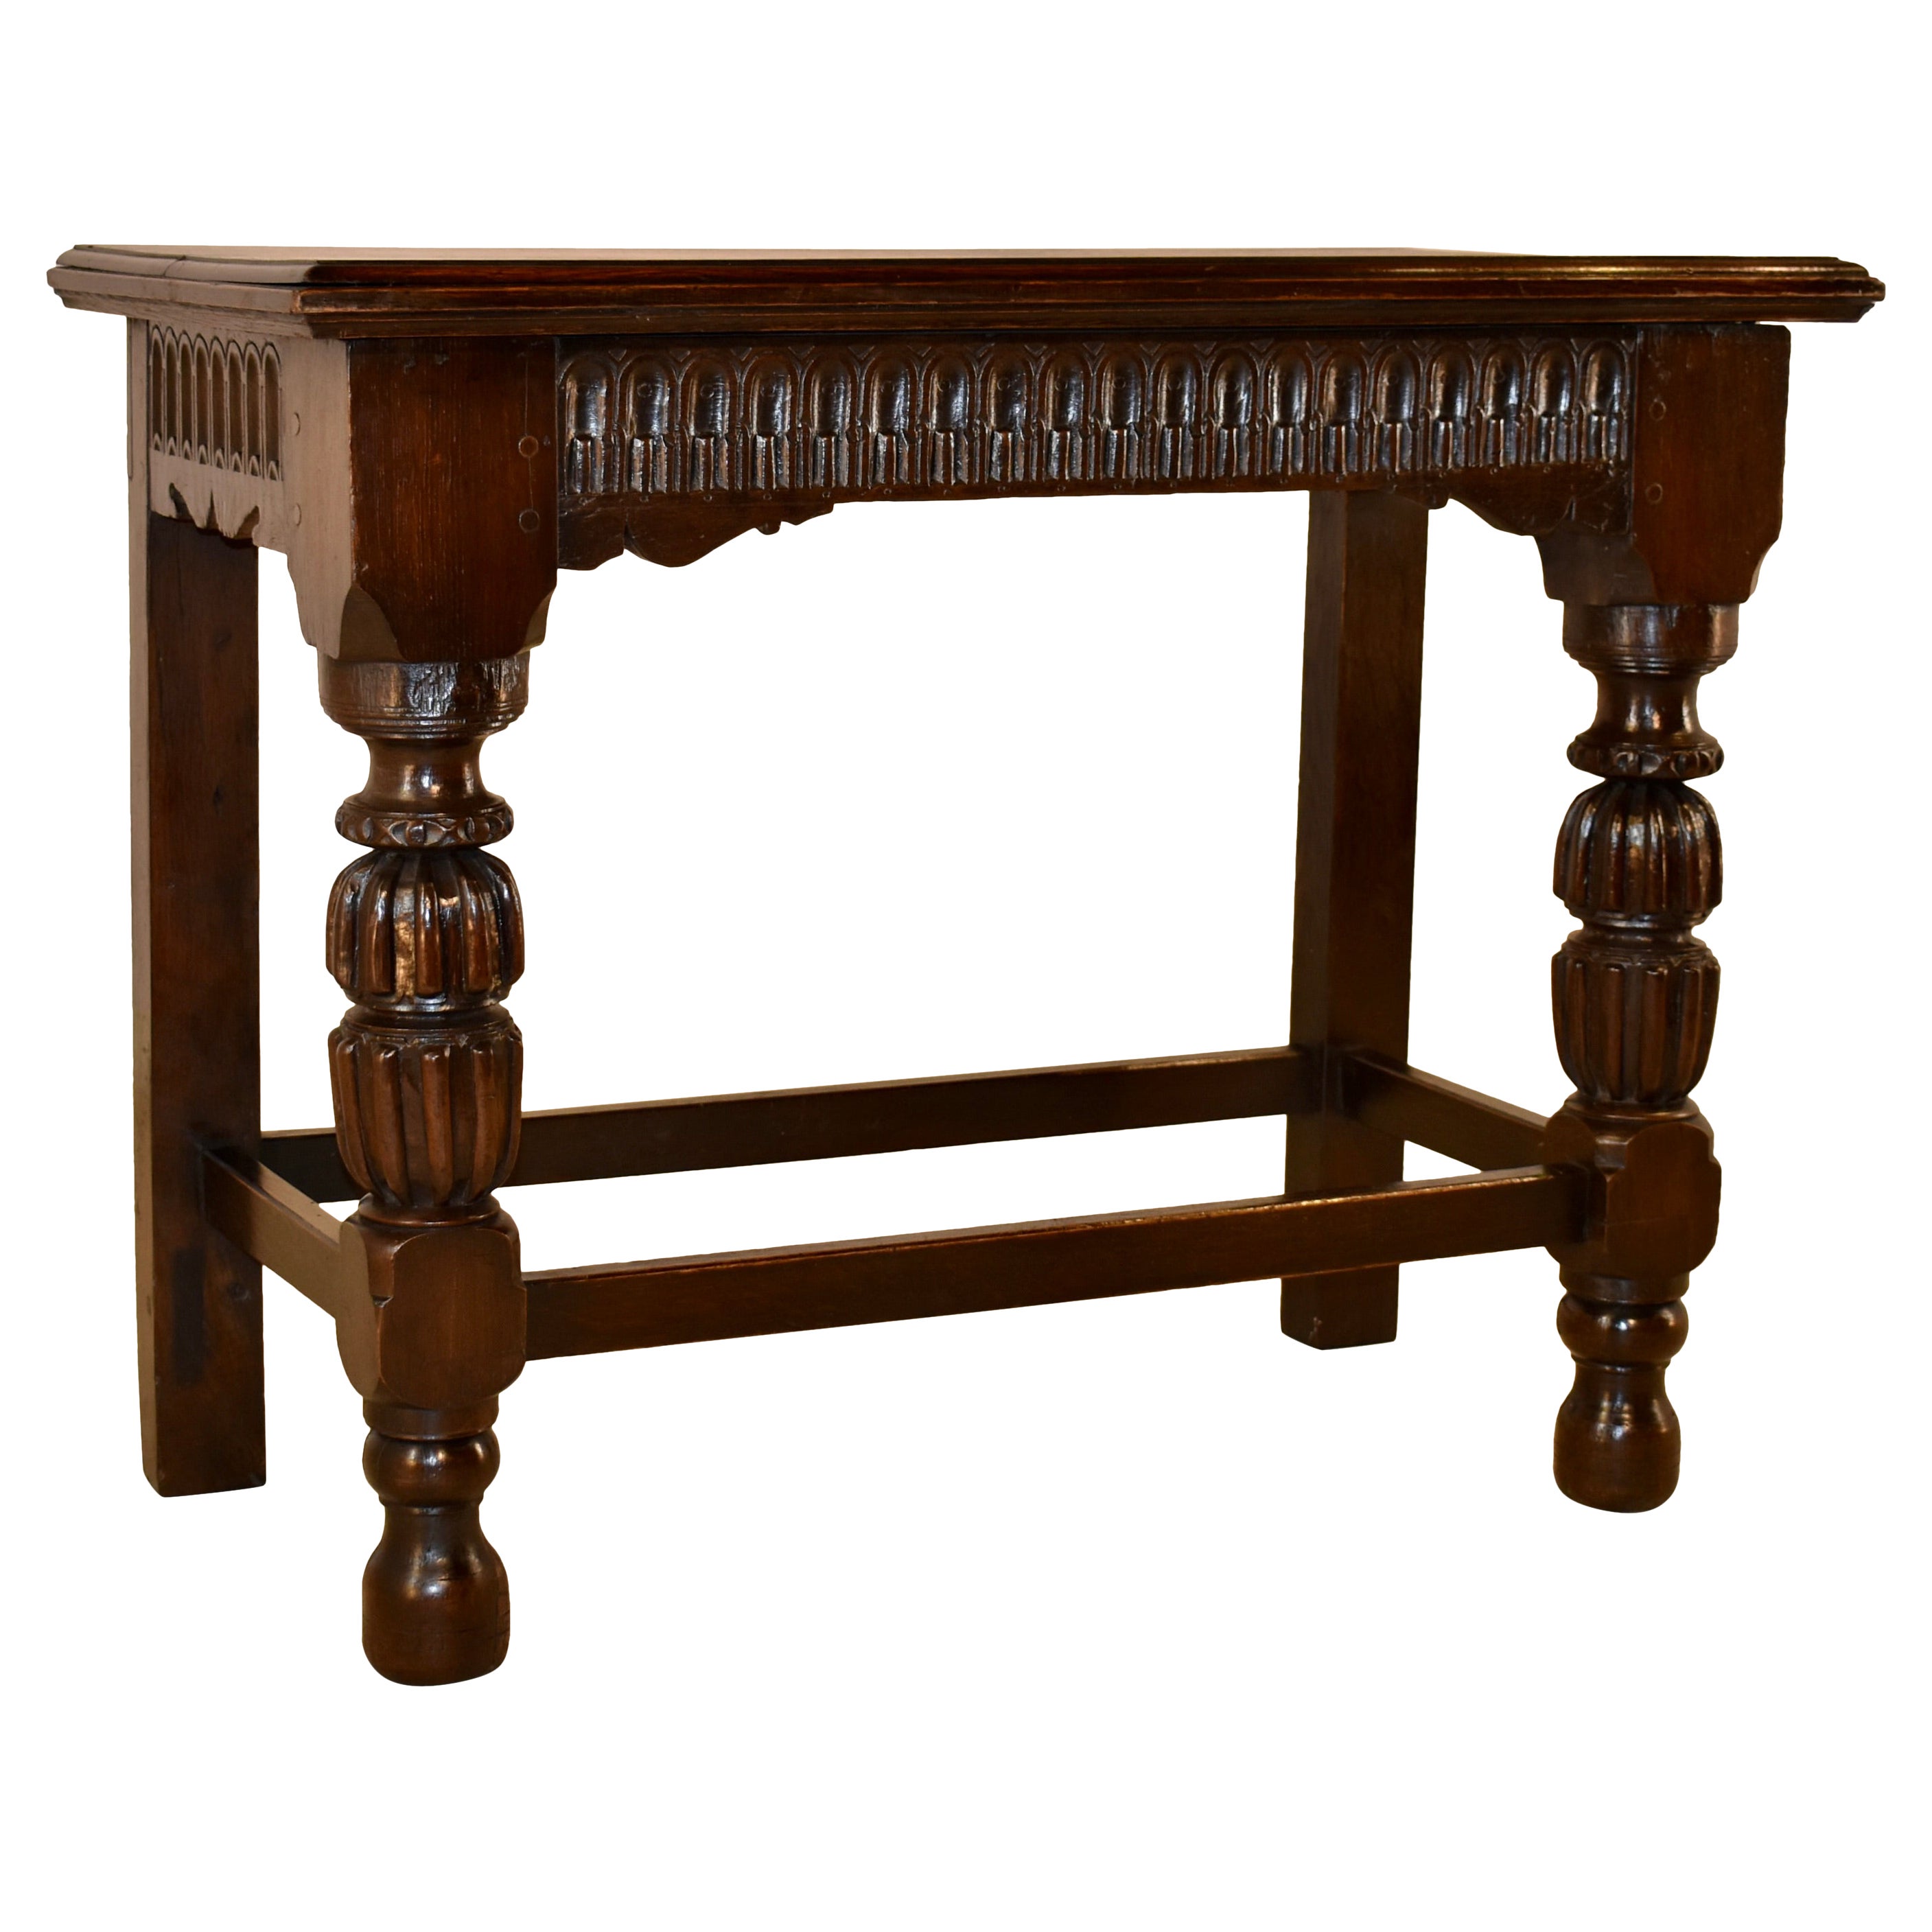 18th Century English Oak Console or Serving Table